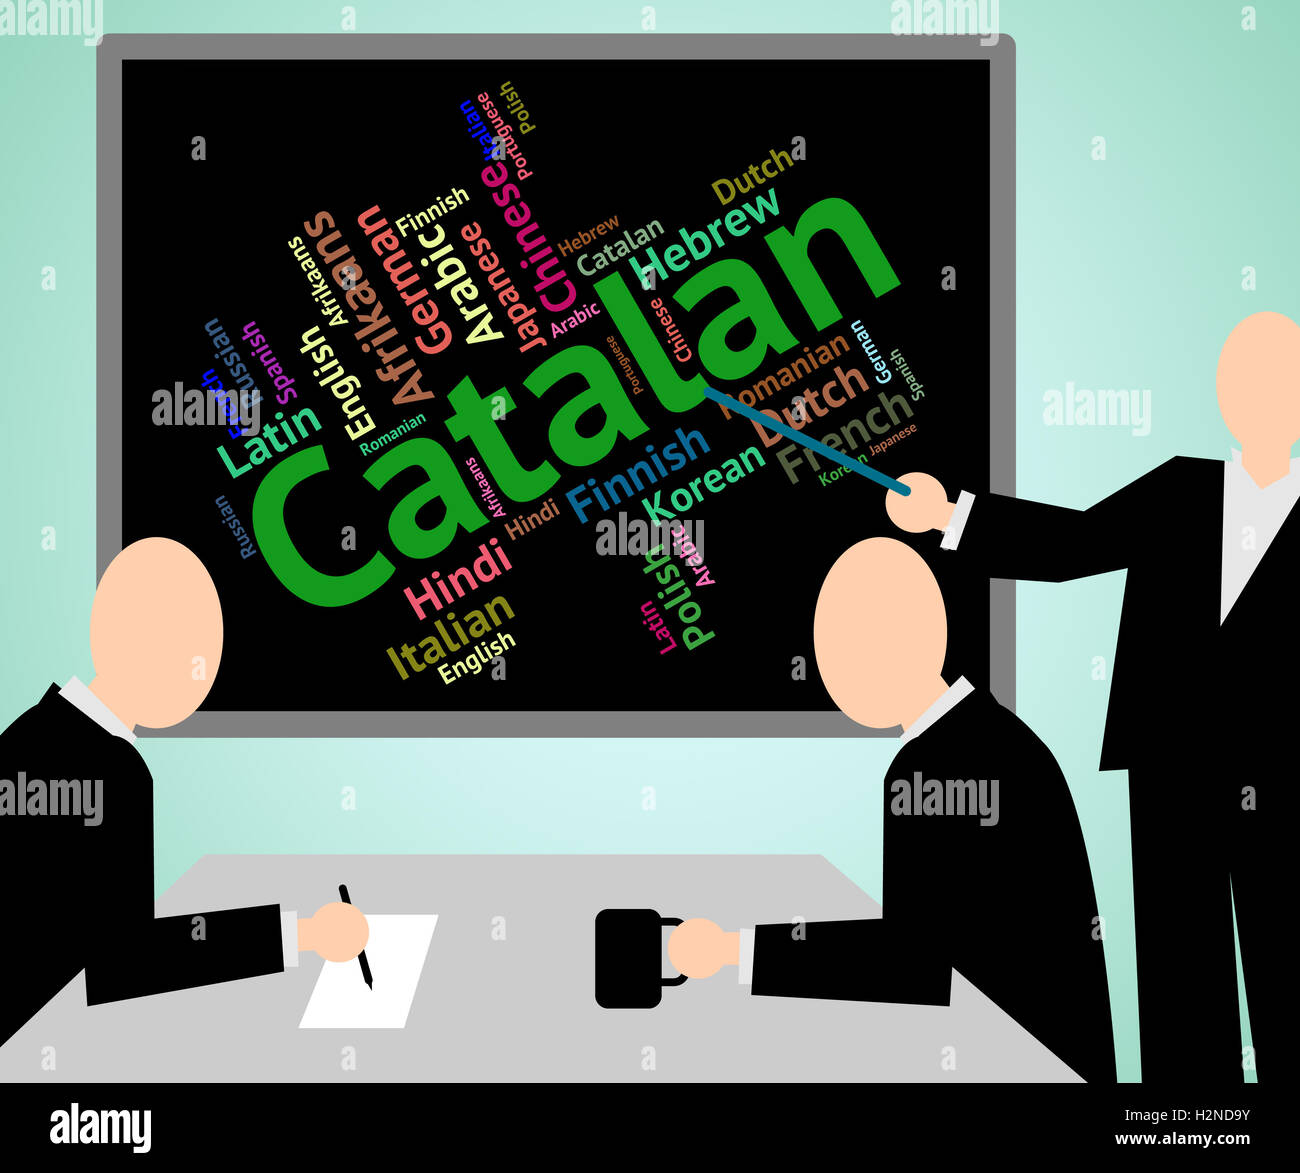 Catalan Language Showing Languages Catalonia And Text Stock Photo